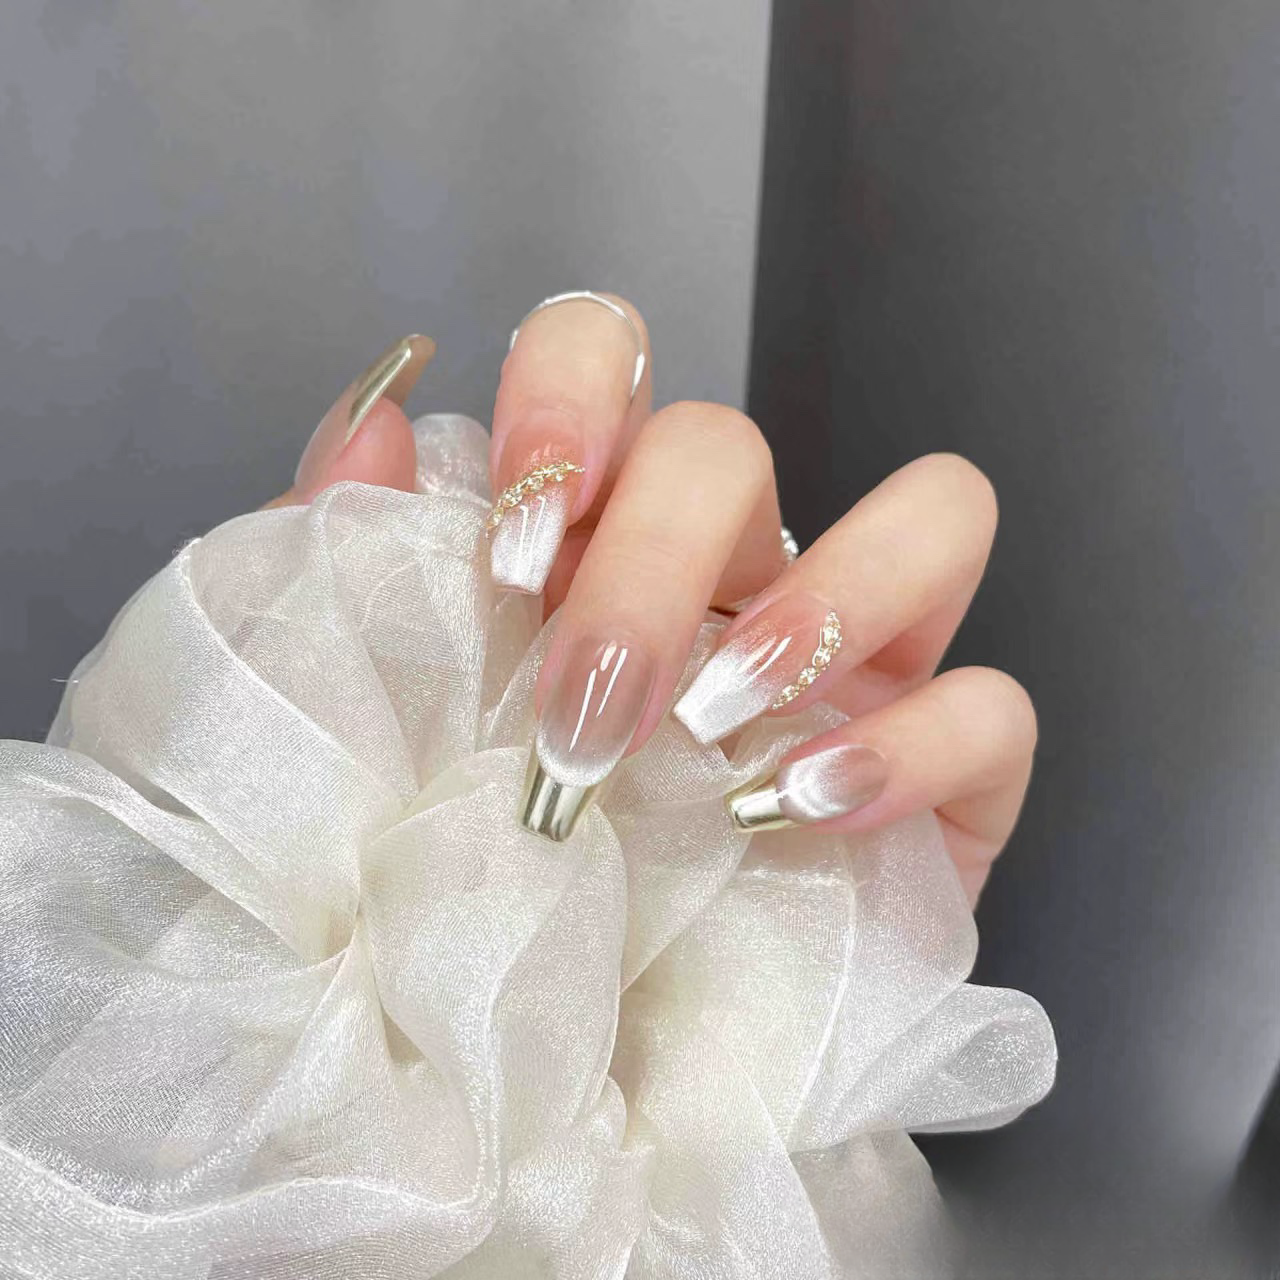 the Gentle French Nude Almond False Nails from SHOPQAQ